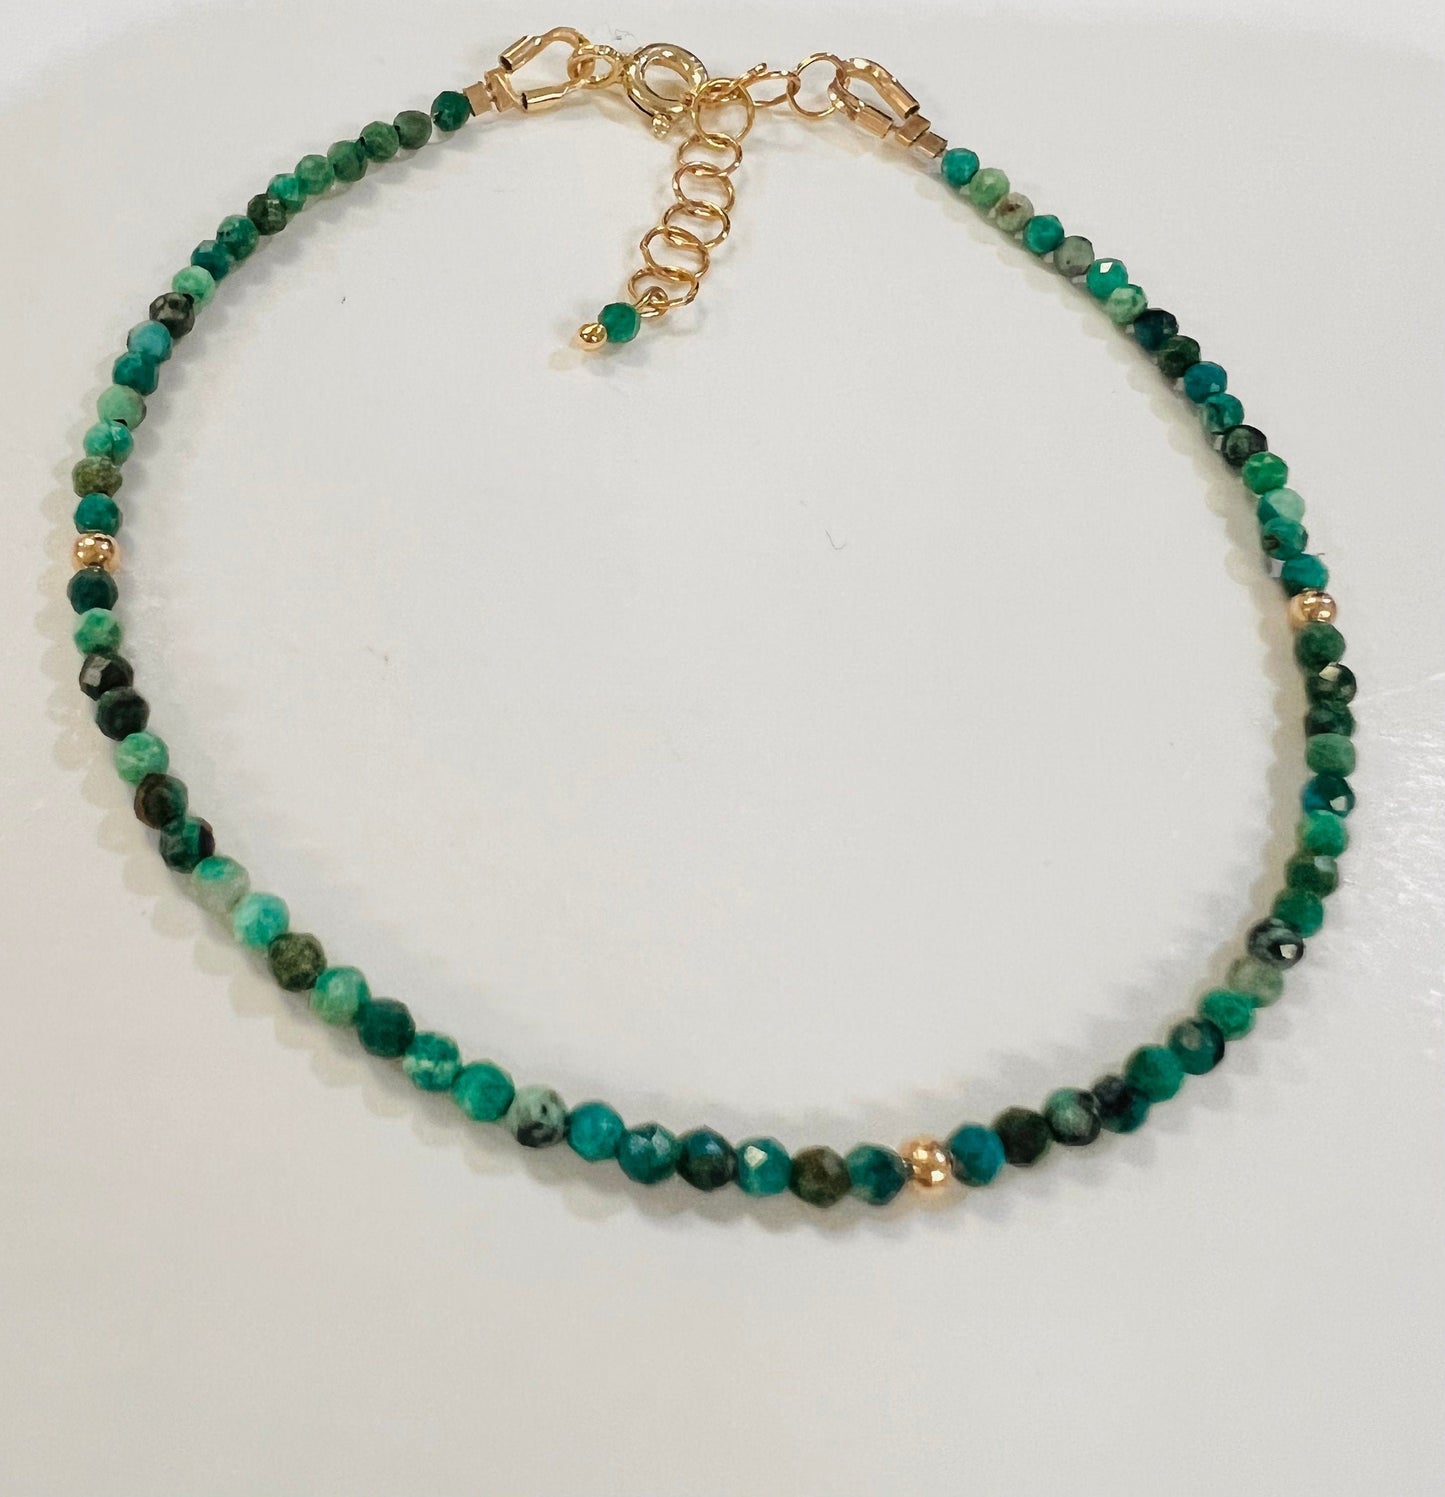 Natural Chrysocolla 2mm micro faceted 14k Gold filled Bracelet with 1” extensions,Precious Gemstones gift .